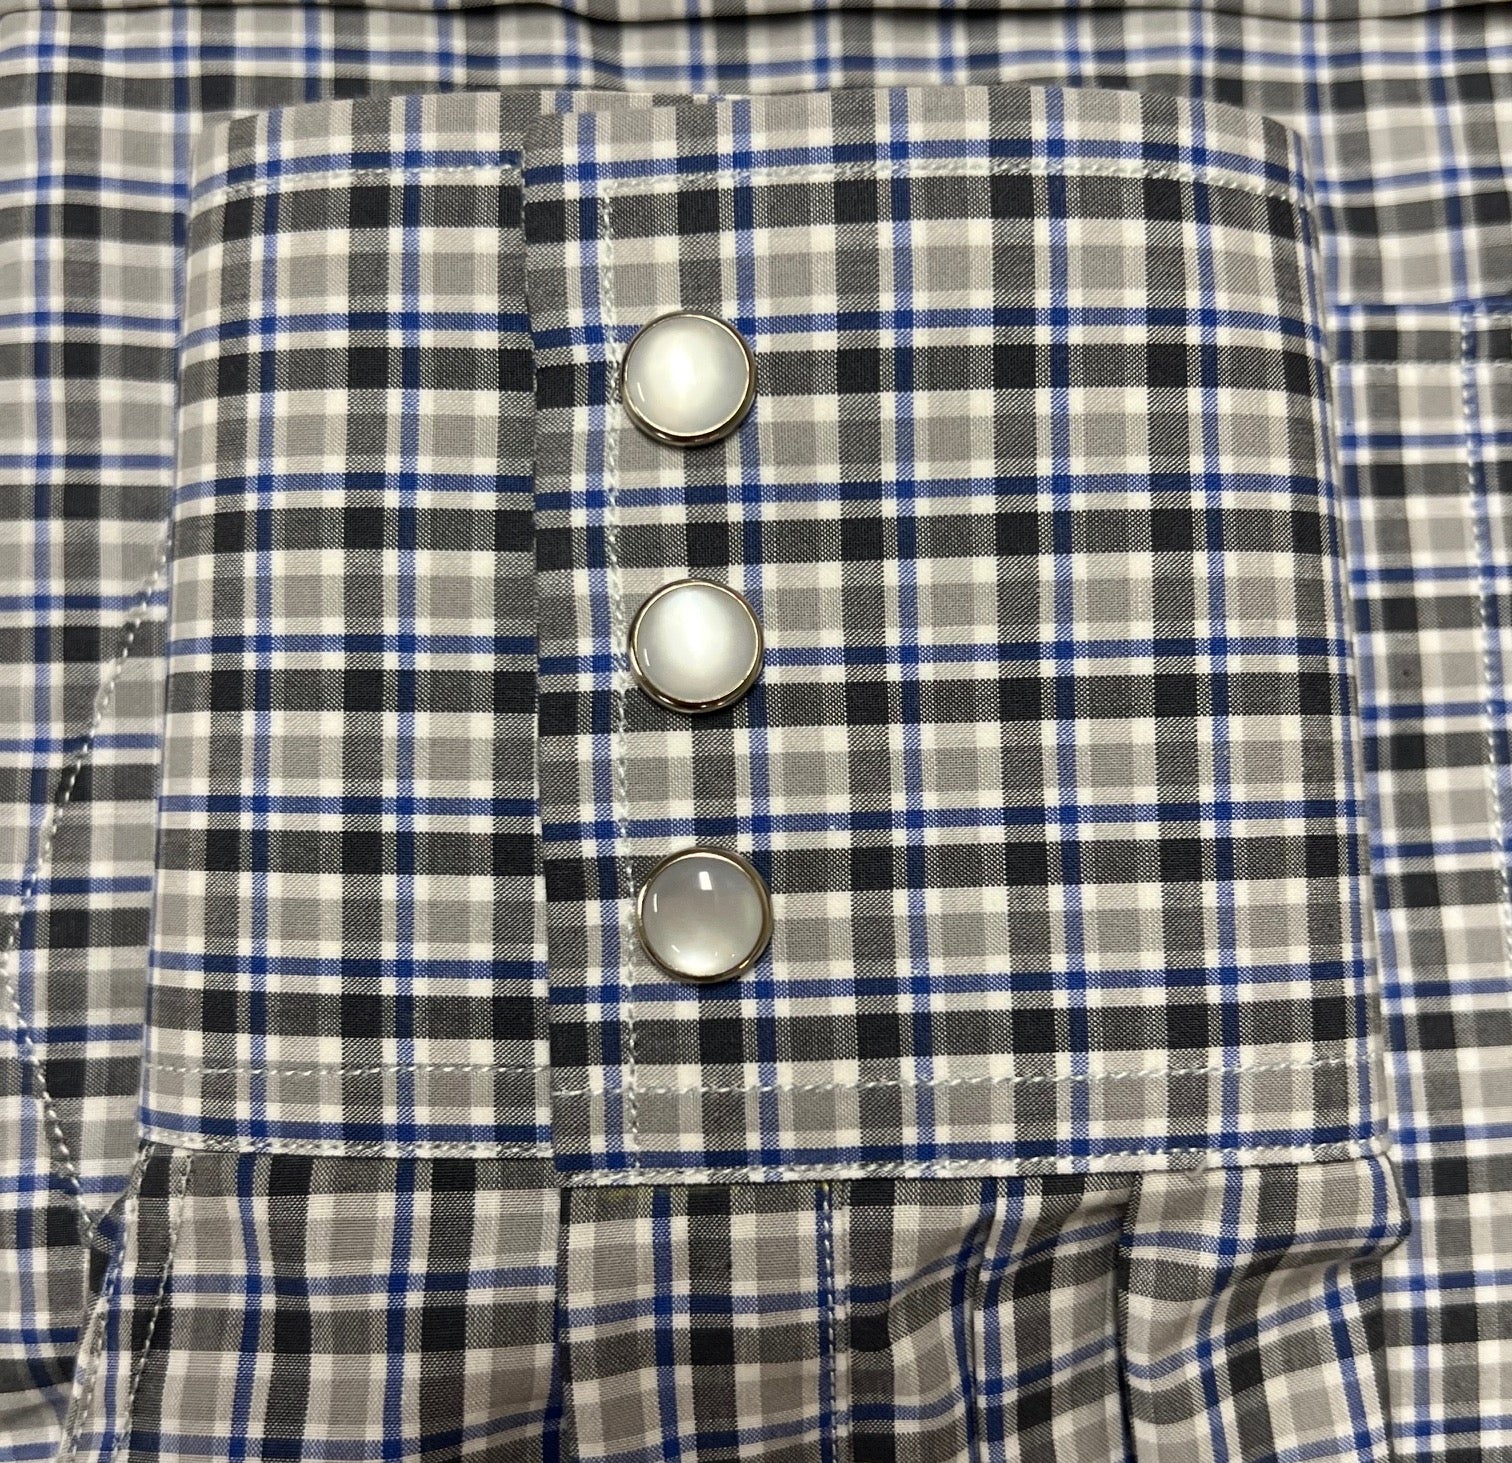 Heritage Western Check Pearl Snap Shirt